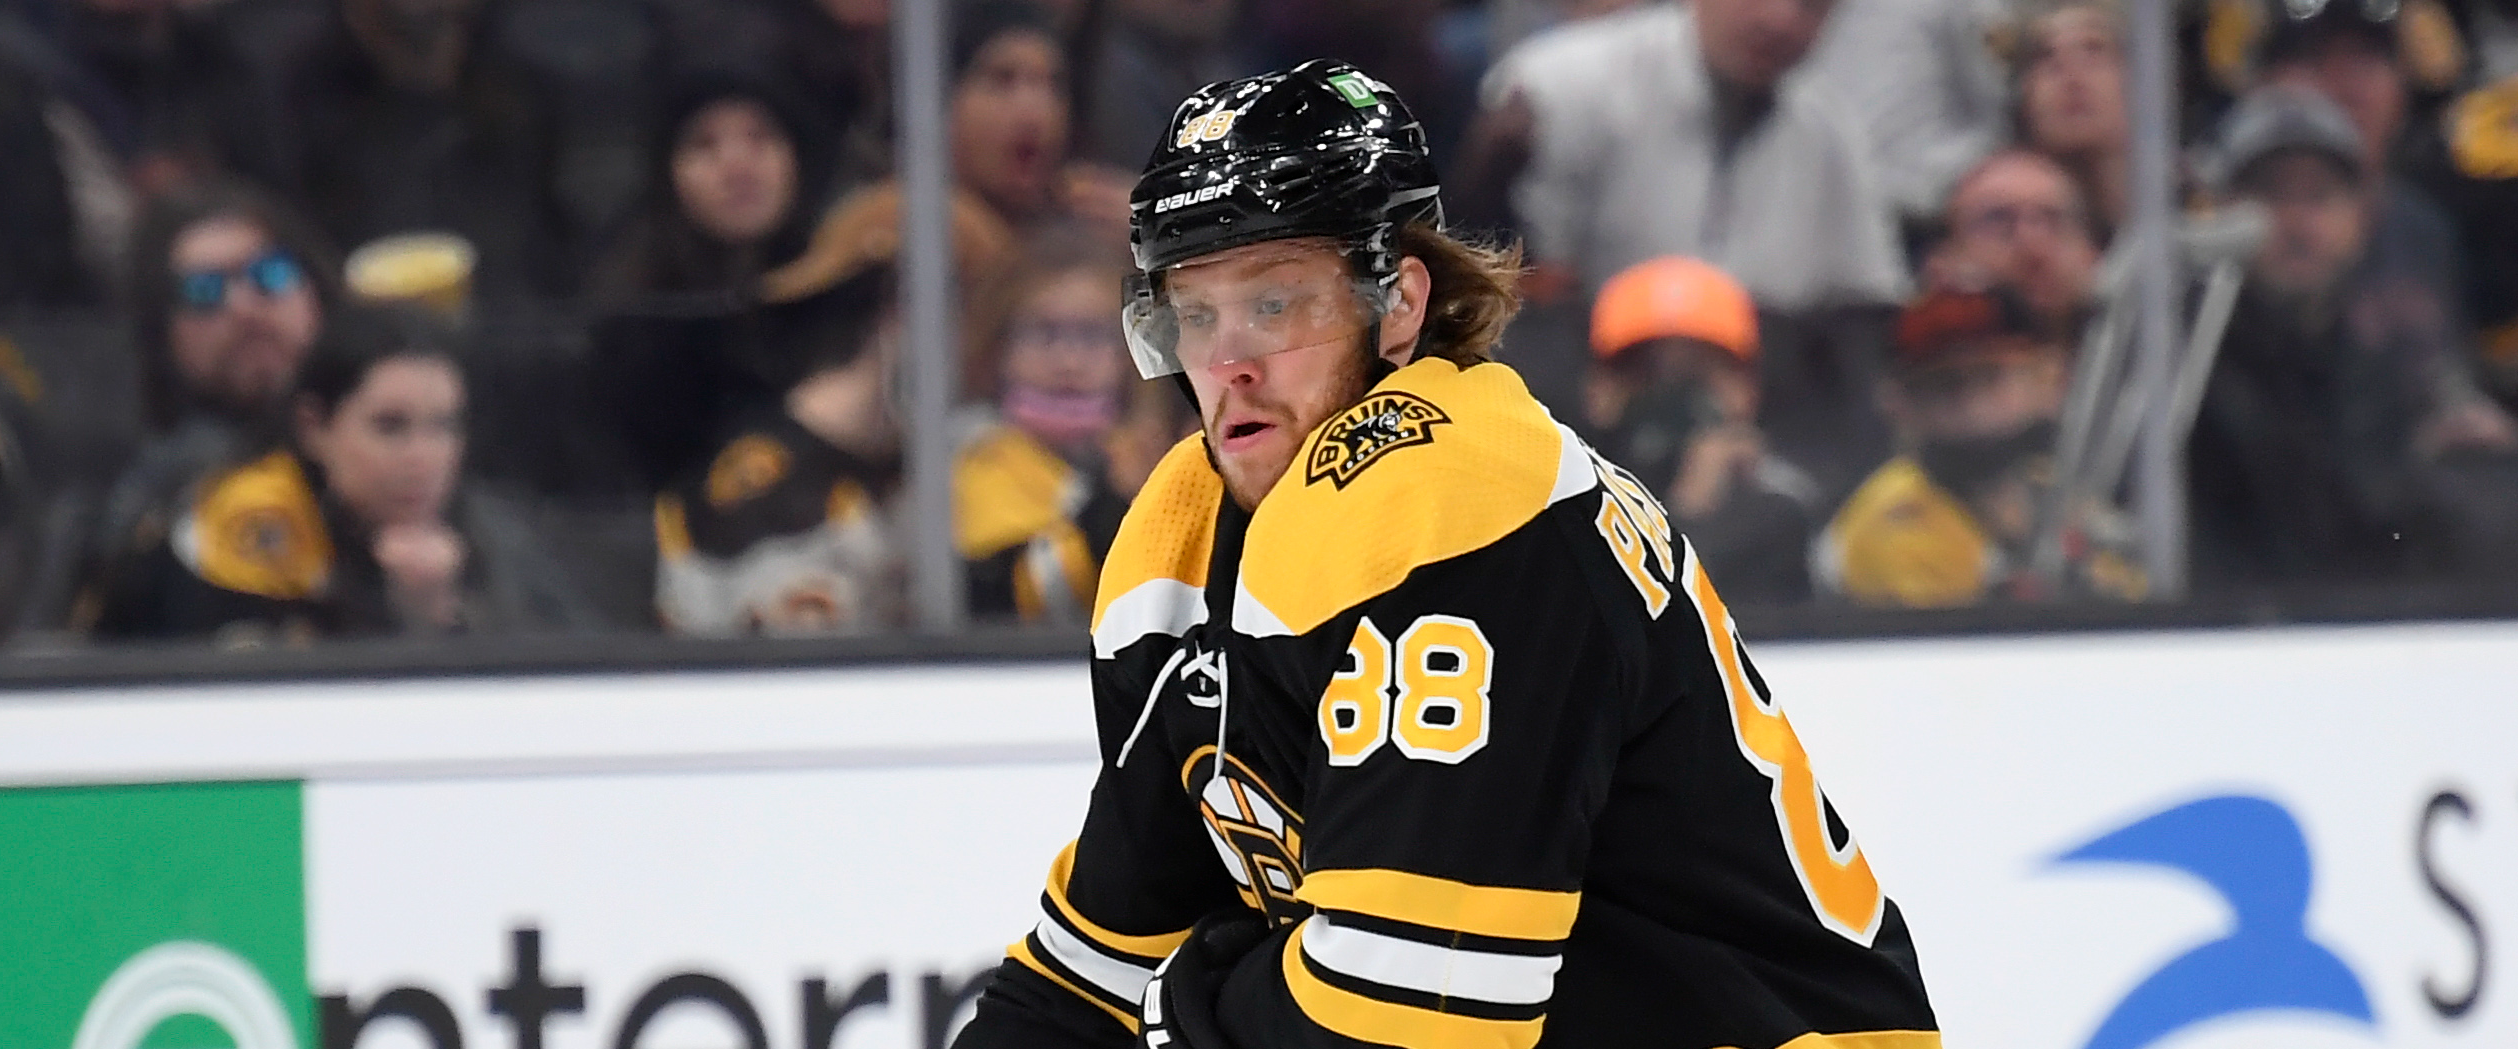 MUST-SEE: Bruins player has no idea what candy corn is; doesn't care either